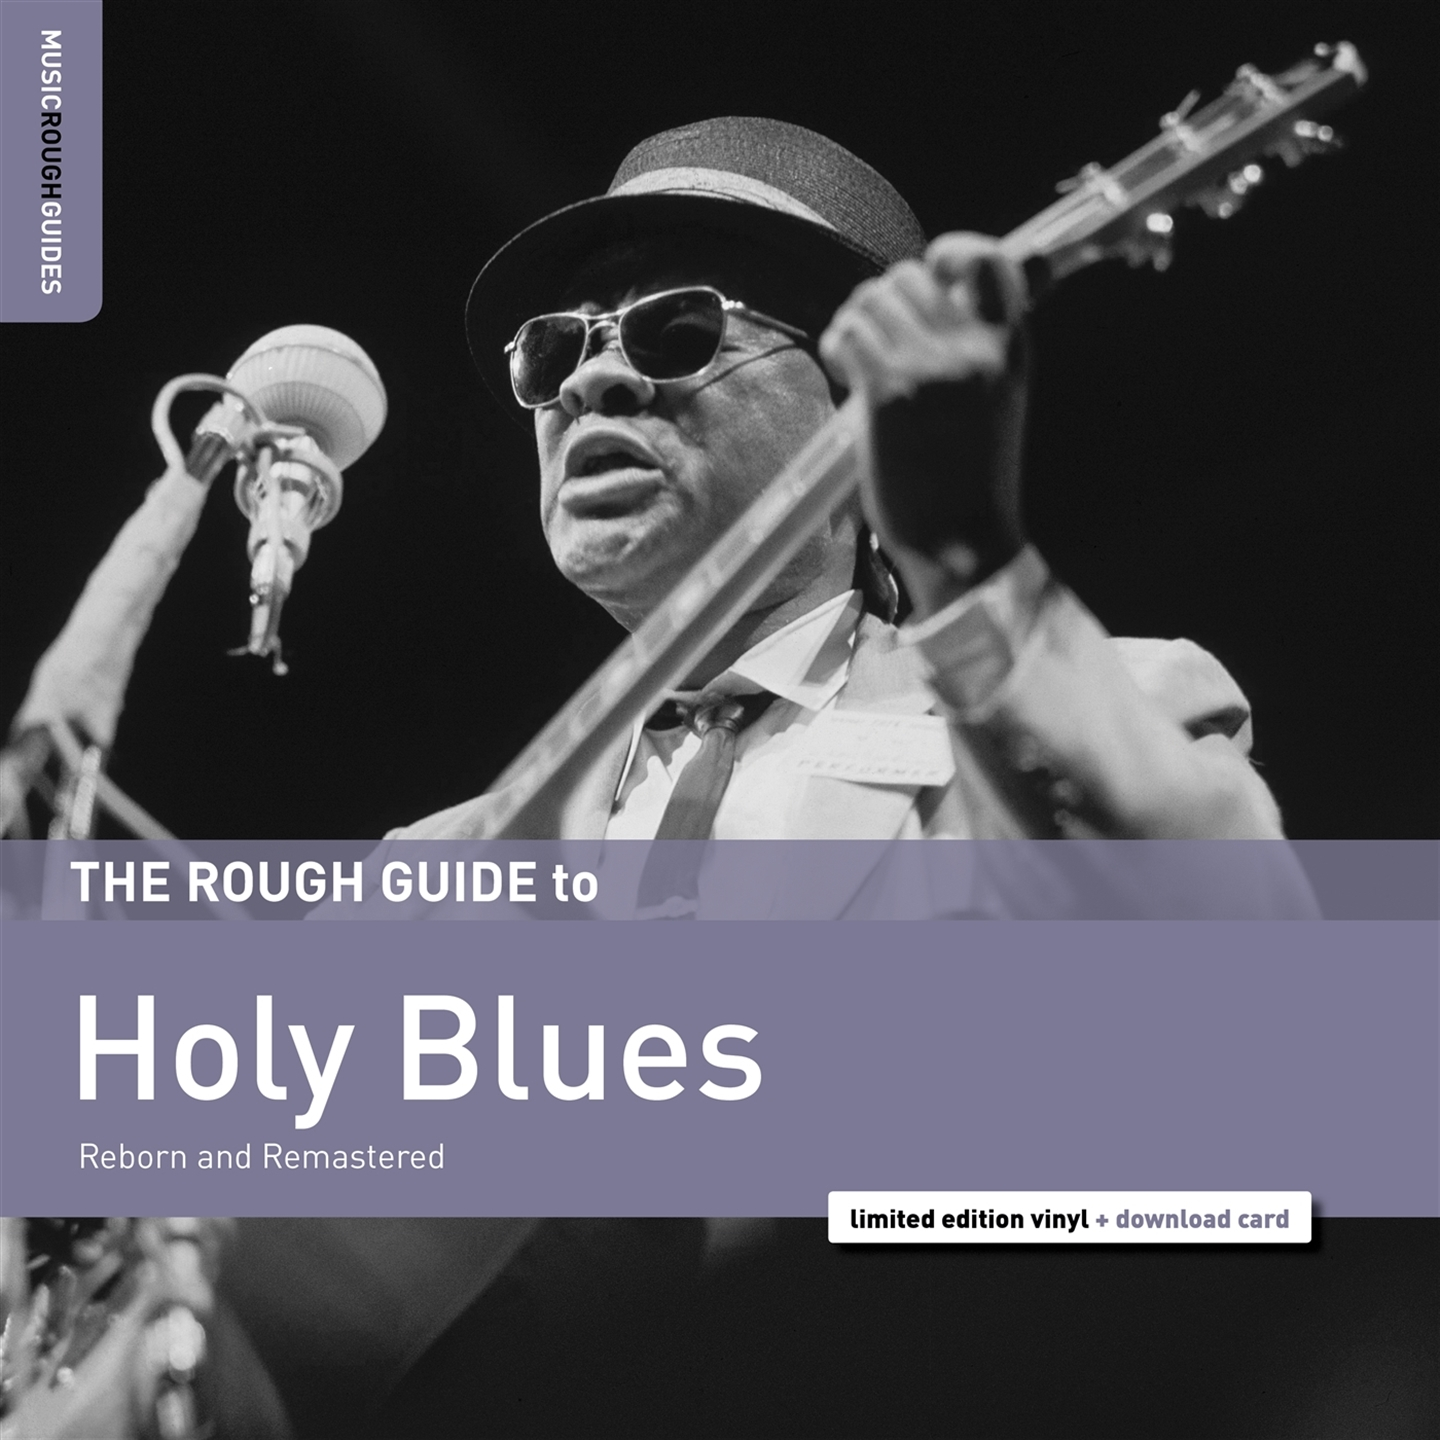 THE ROUGH GUIDE TO THE HOLY BLUES [LP]